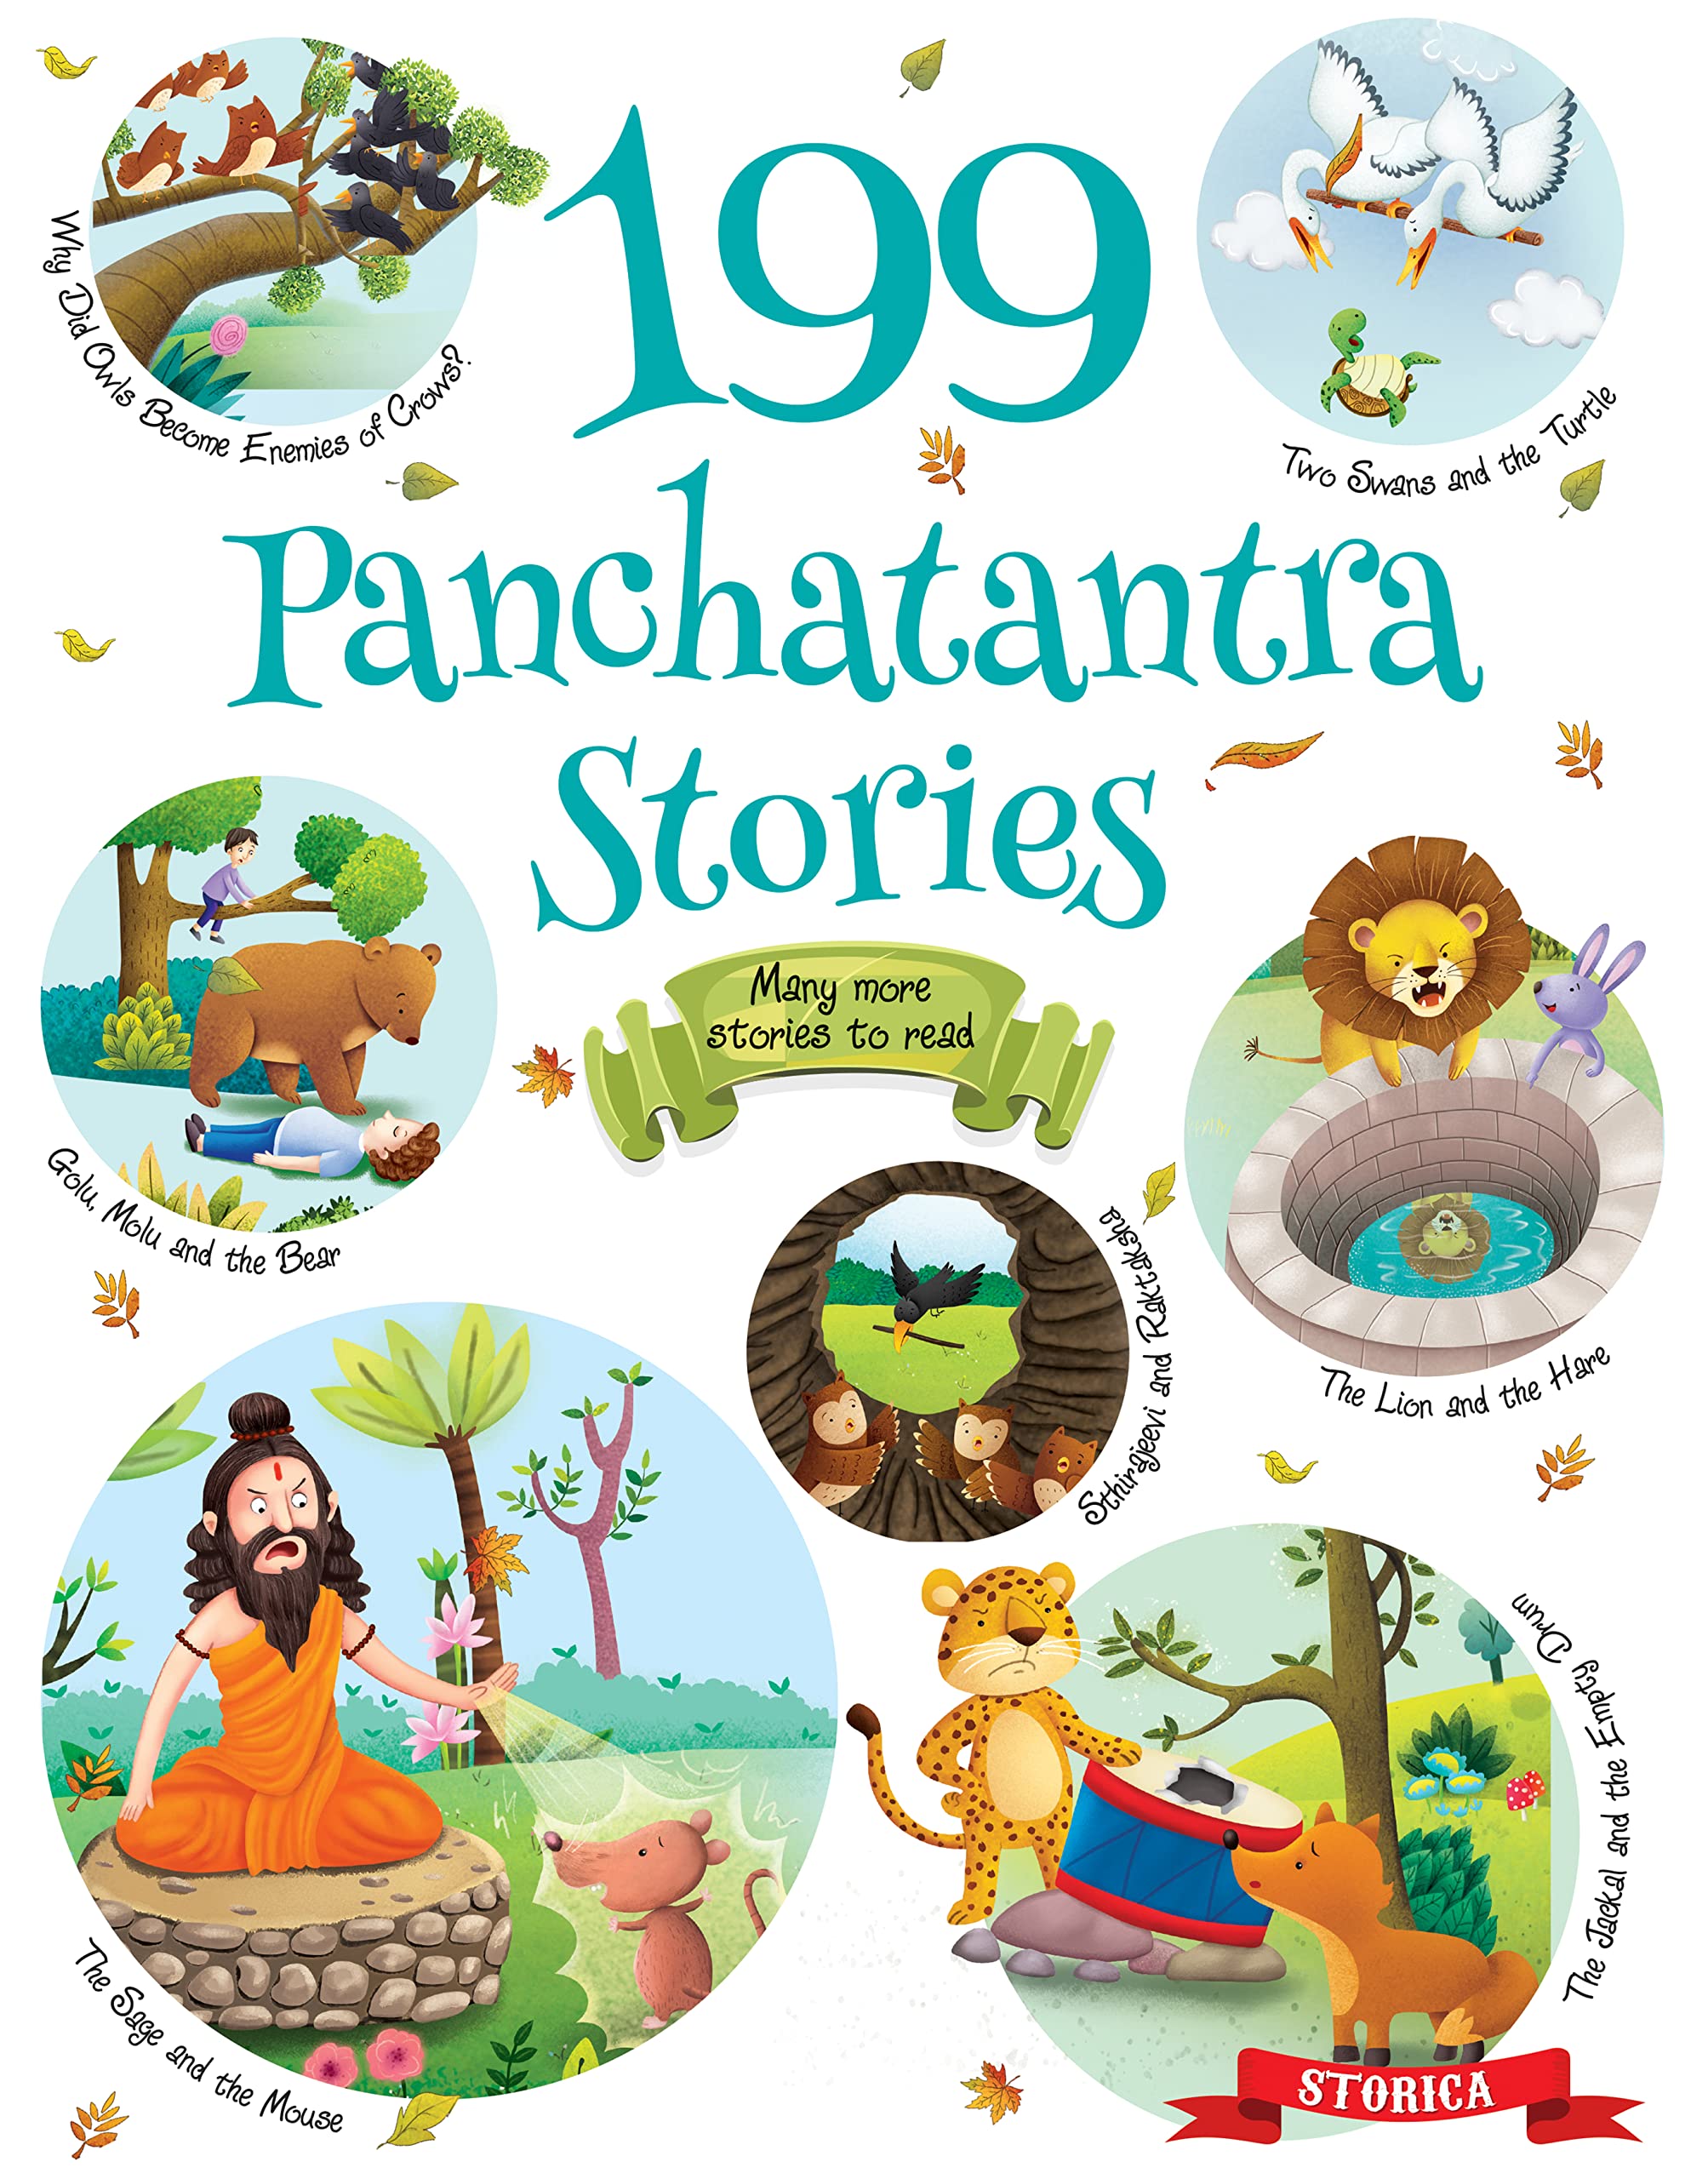 Pegasus 199 Panchatantra Stories for Children for 6 Years Old & Above